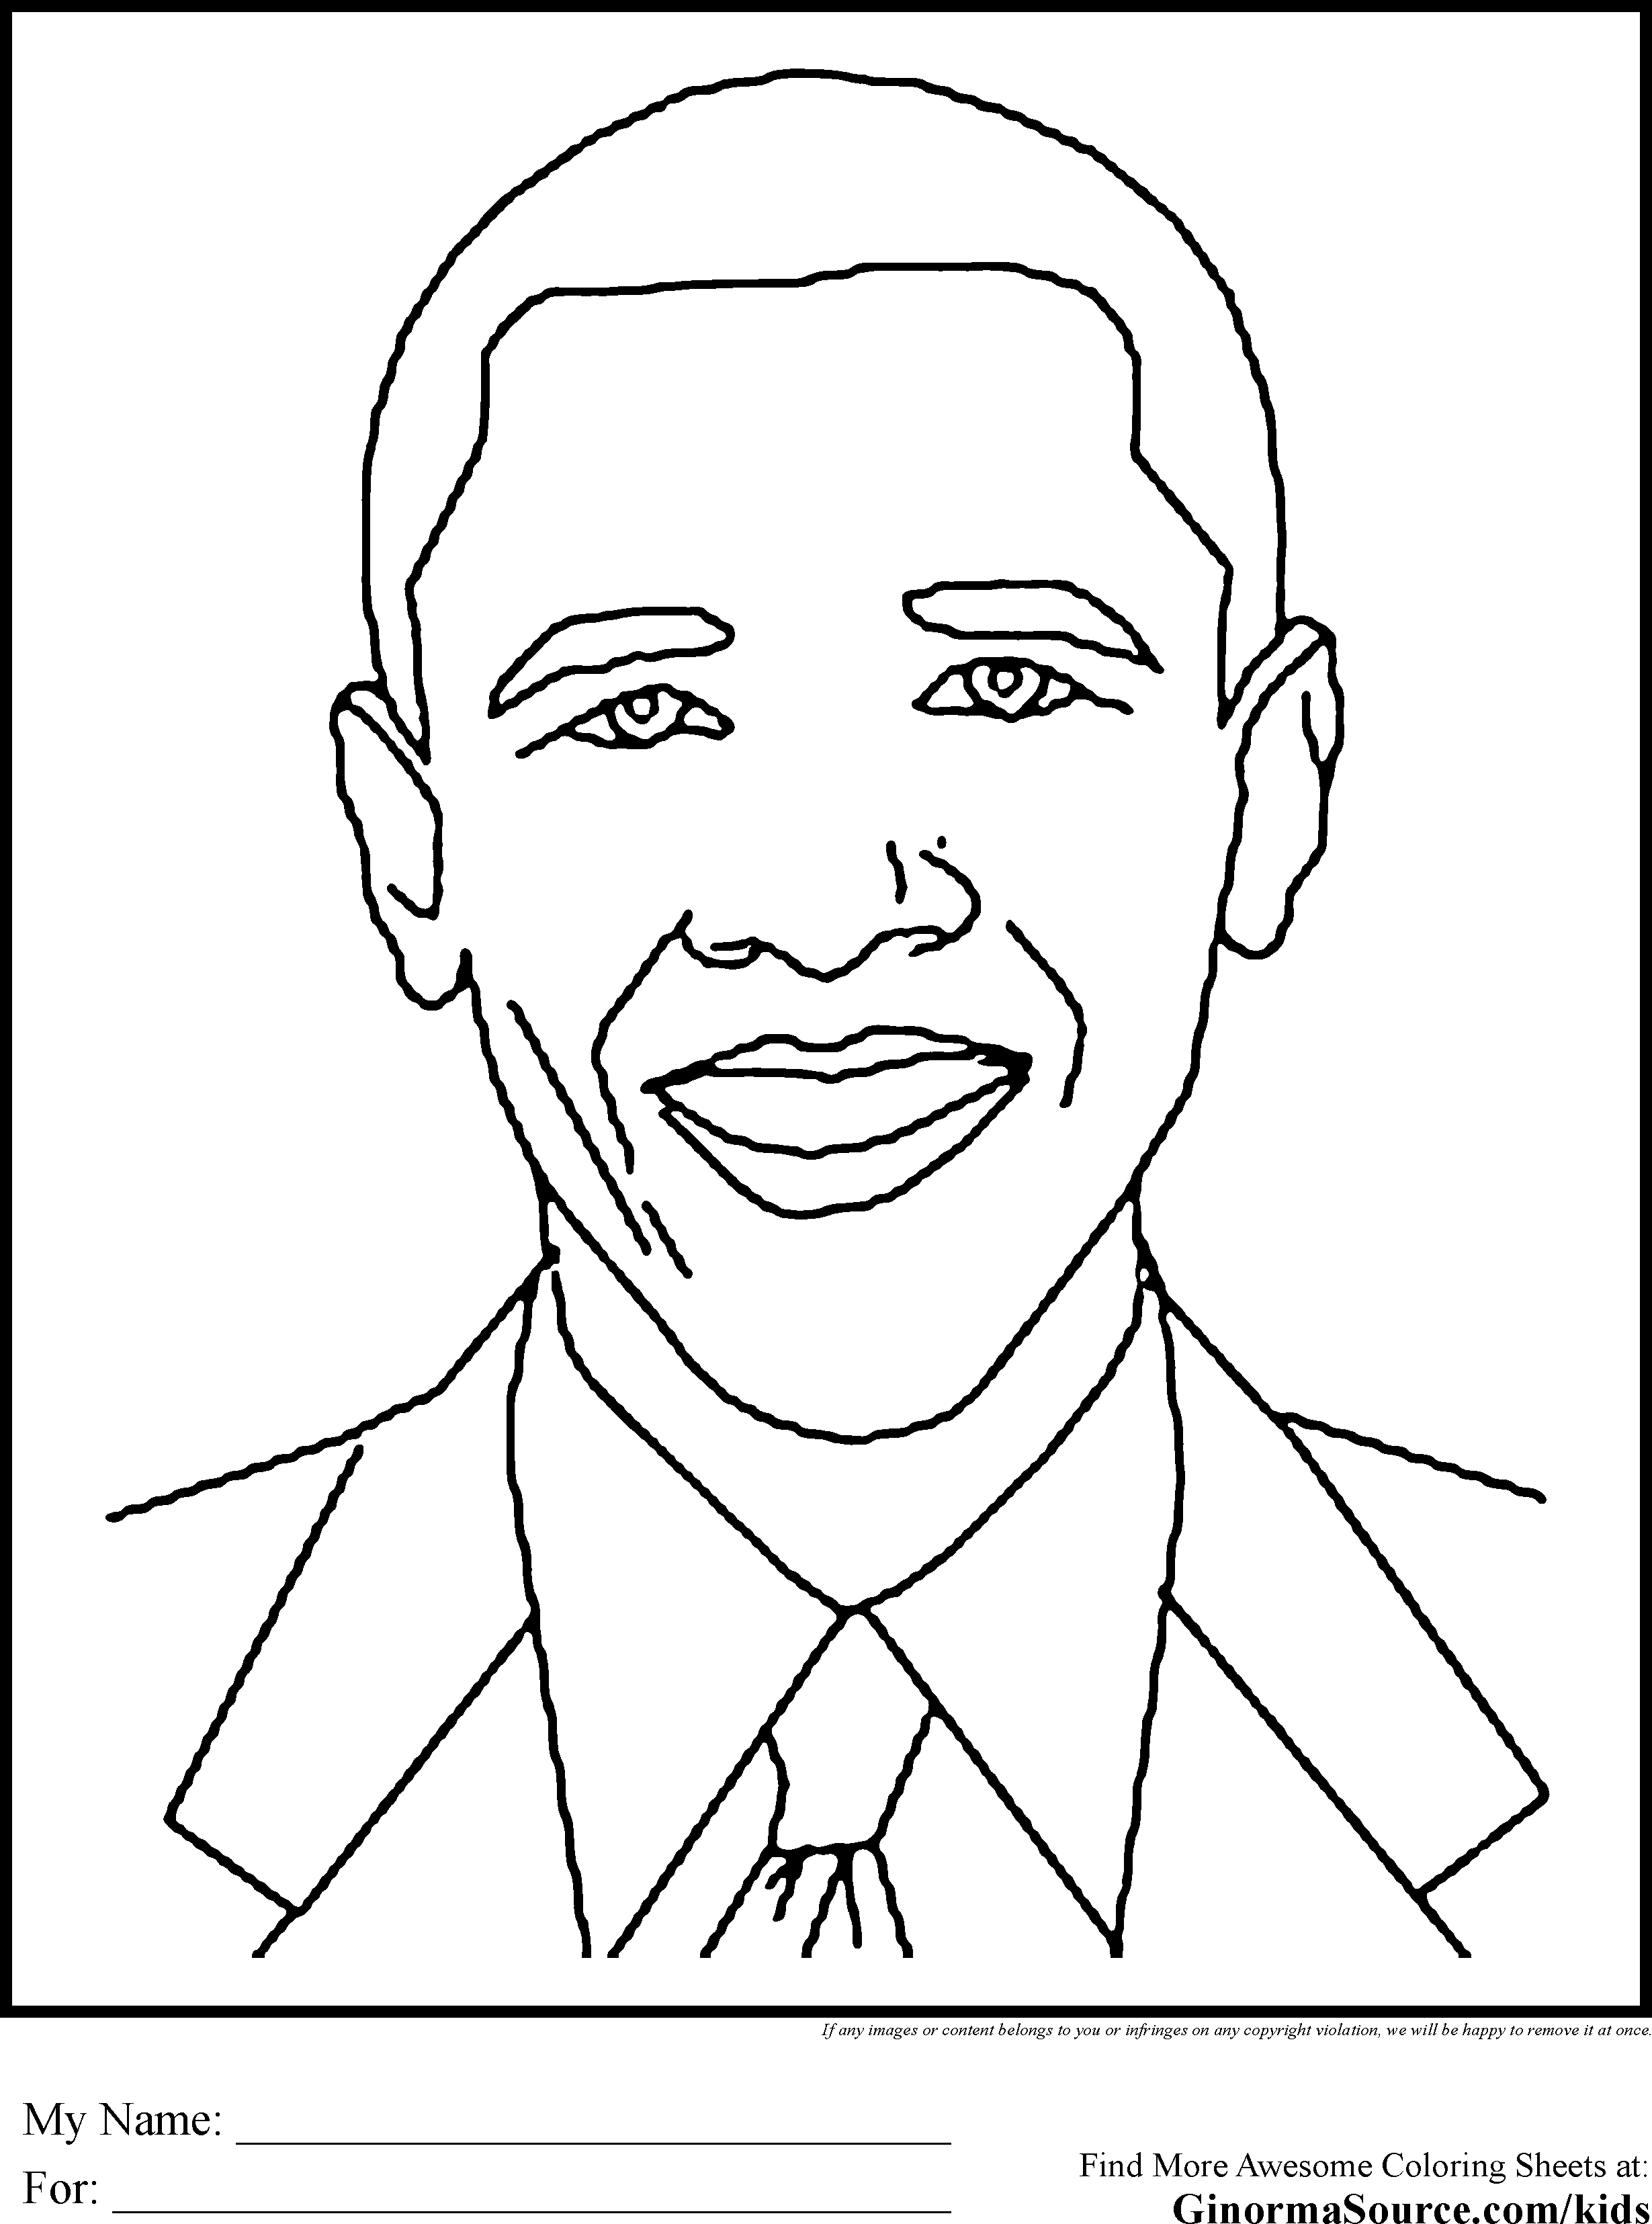 Obama - Coloring Page African Americans